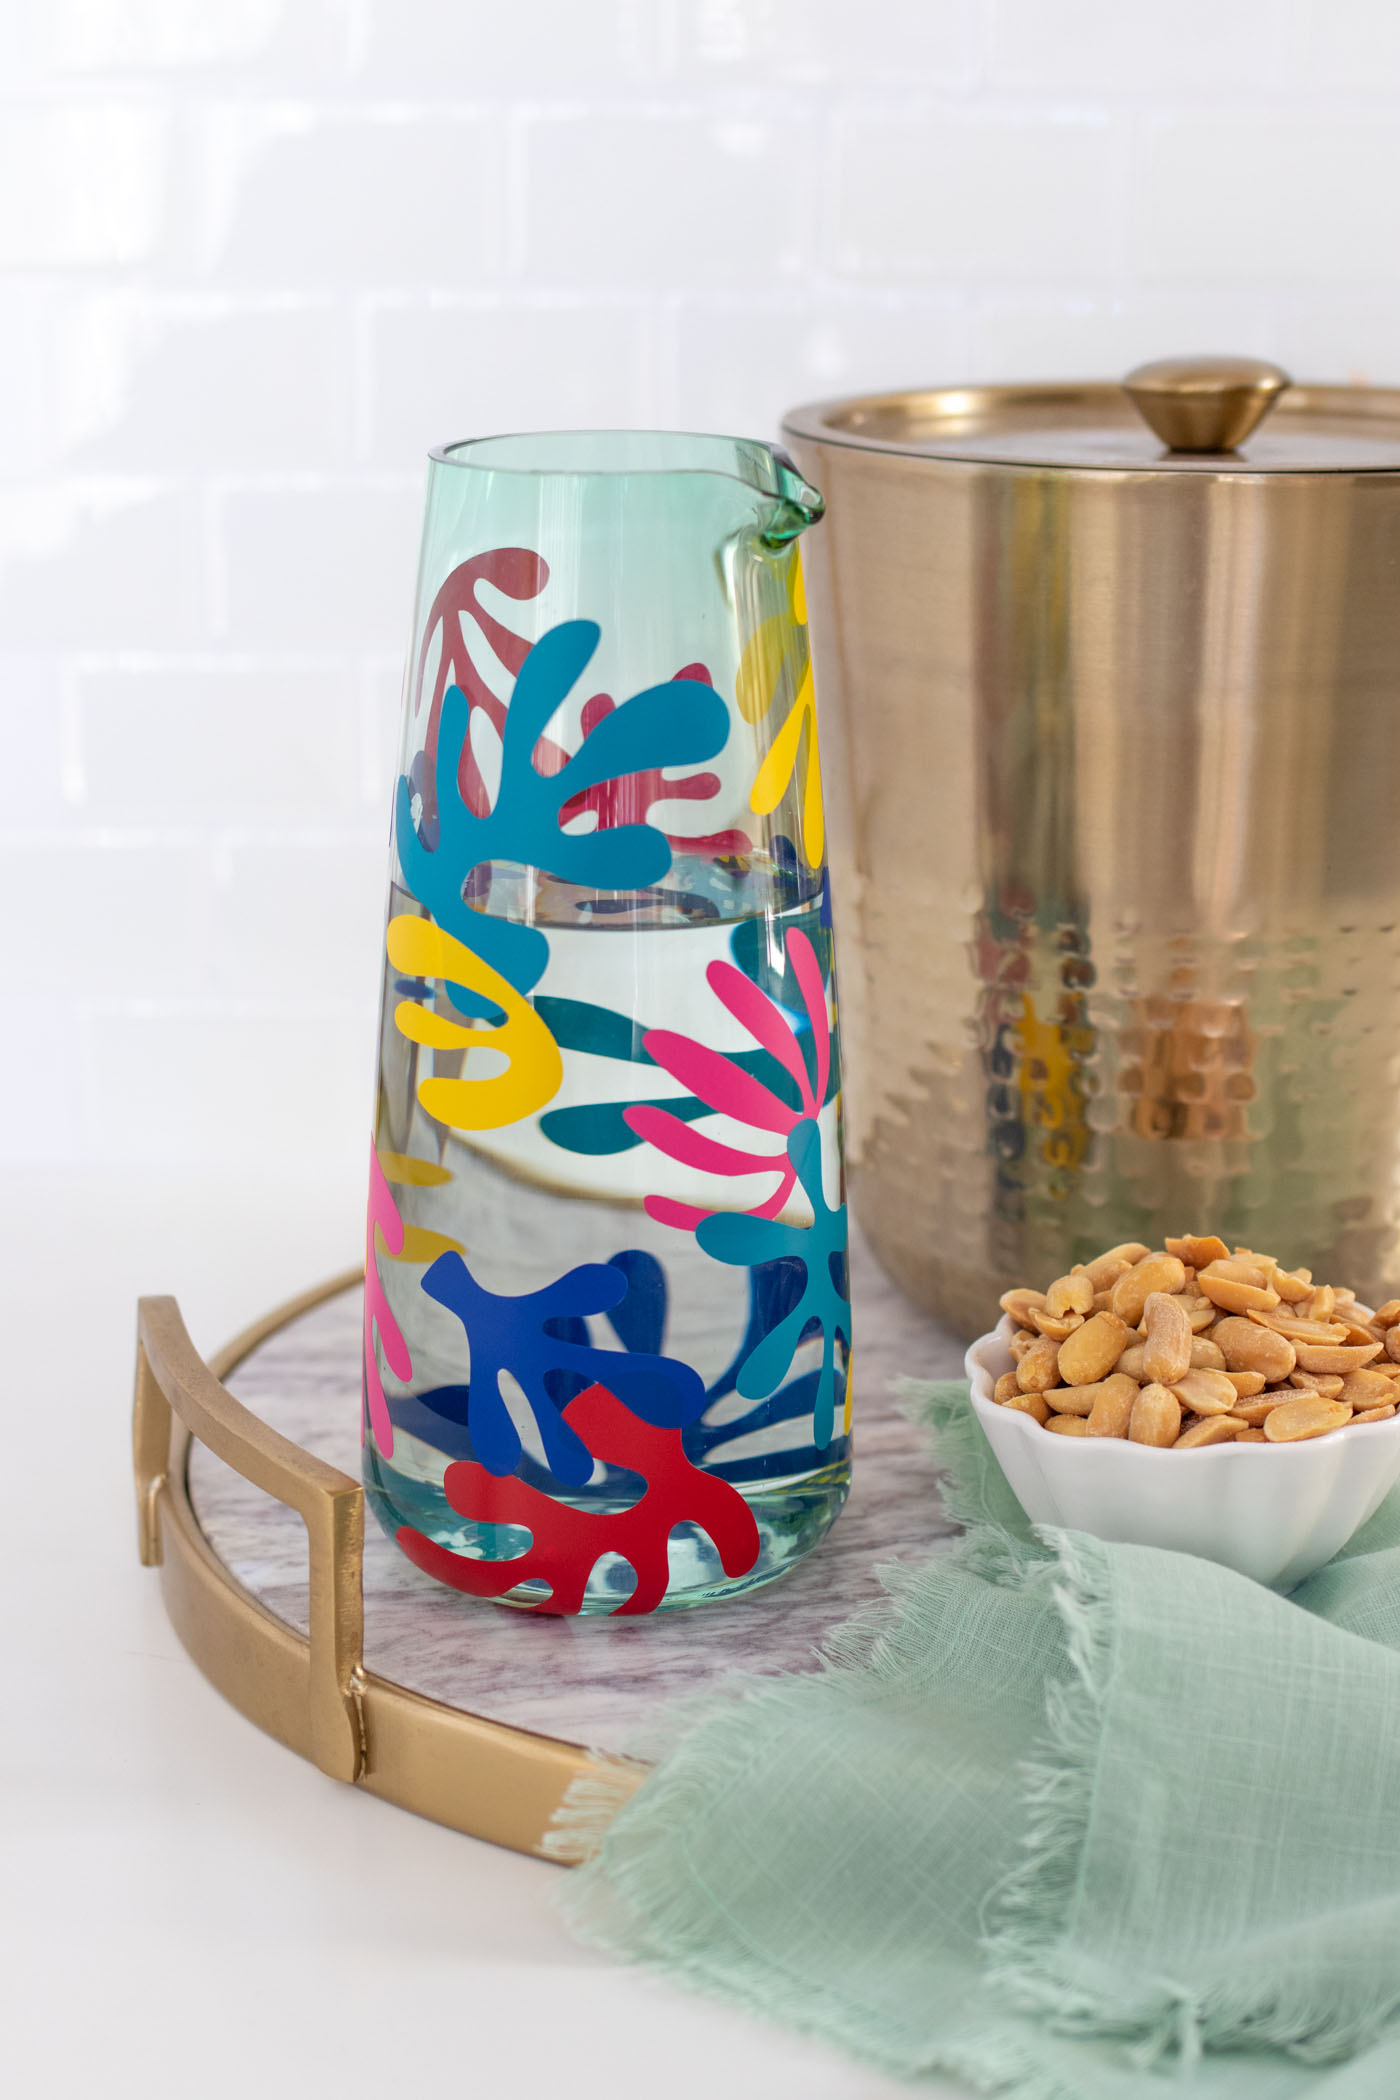 DIY Matisse Pitcher with Cricut // How to cut vinyl with Cricut for making a matisse-inspired pitcher with colorful abstract prints! Download the free SVG cut files for Cricut or Silhouette #homedecor #freedownload #vinyl #diydecor #freetemplate #entertaining #summerdecor